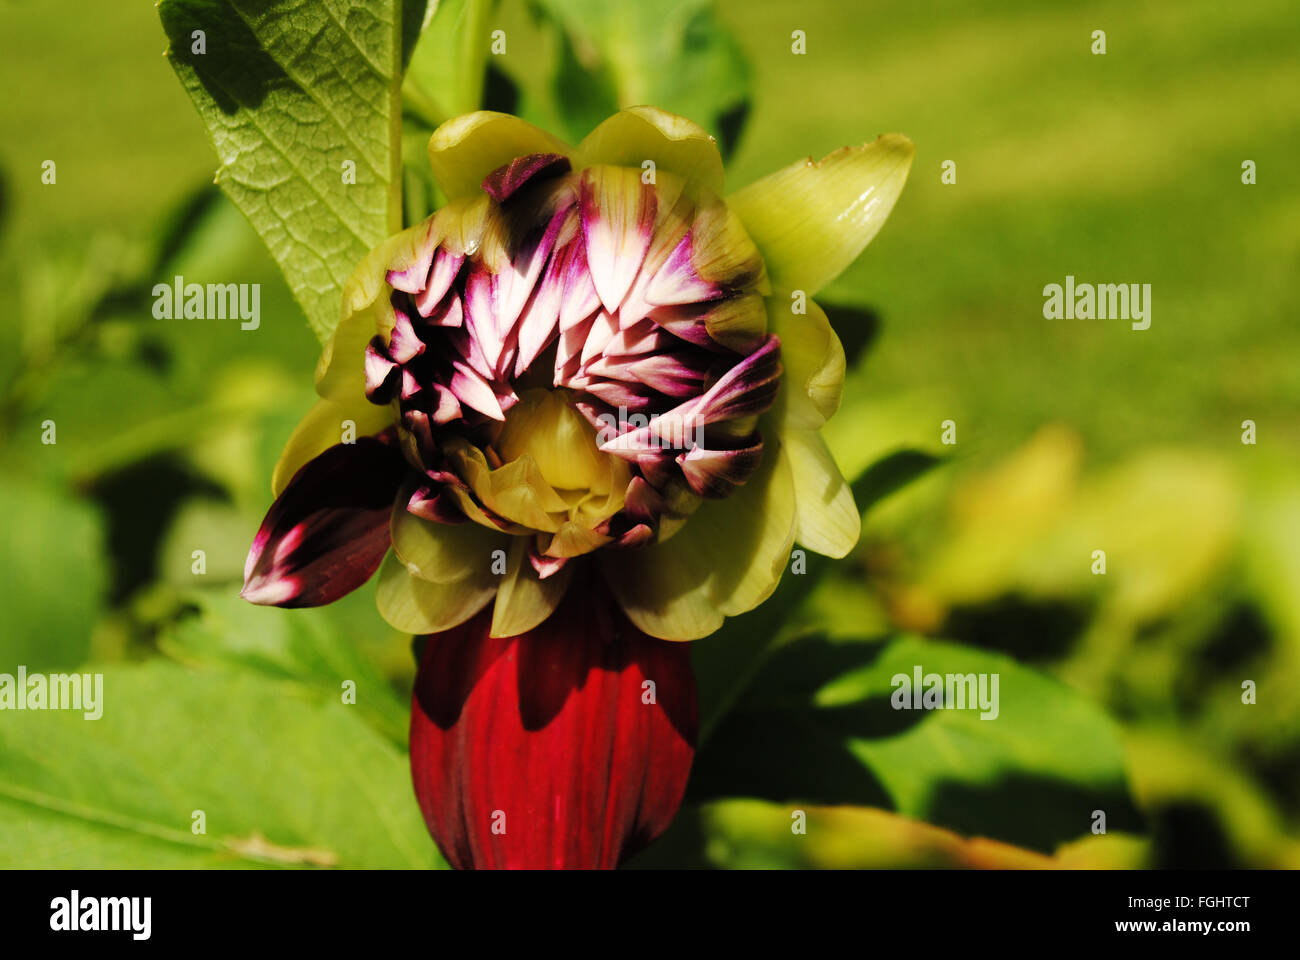 A Maroon and White Dahlia Budding in Summer Stock Photo